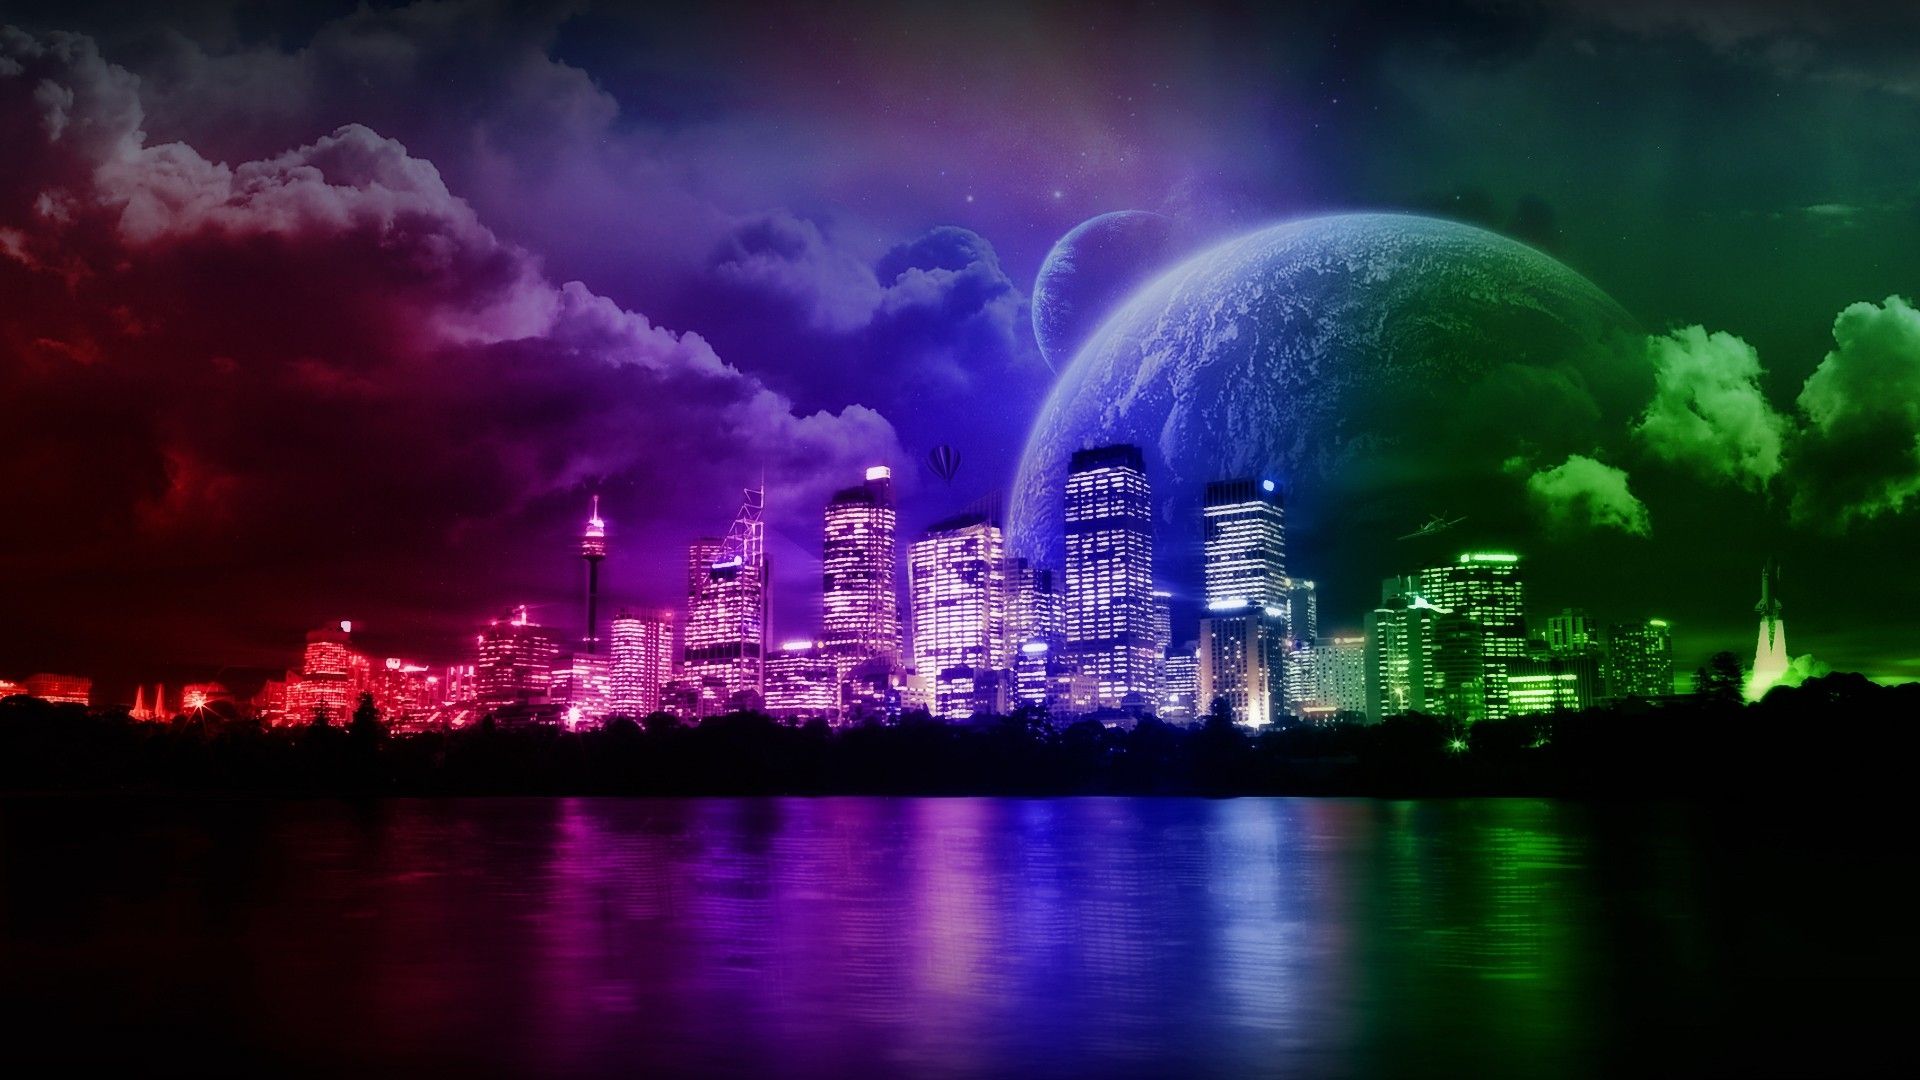 Download Wallpaper, Download 2560x1440 water clouds outer space city colorful planets rainbows science fiction 1920x1080 wallpaper Wallpaper –Free Wallpaper Download